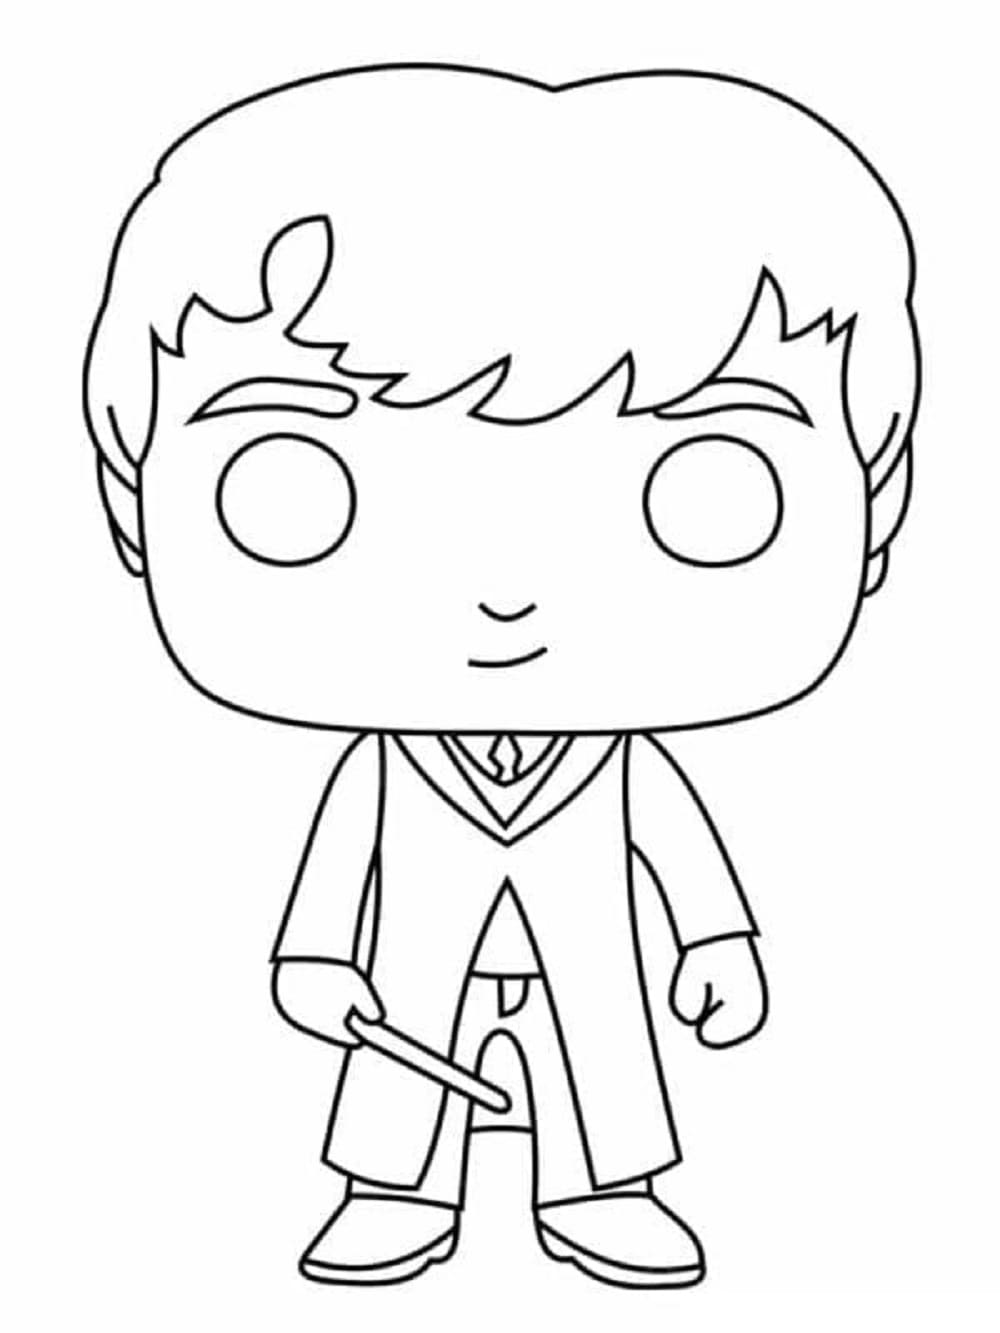 Printable Funko Pop Gary Coloring Page